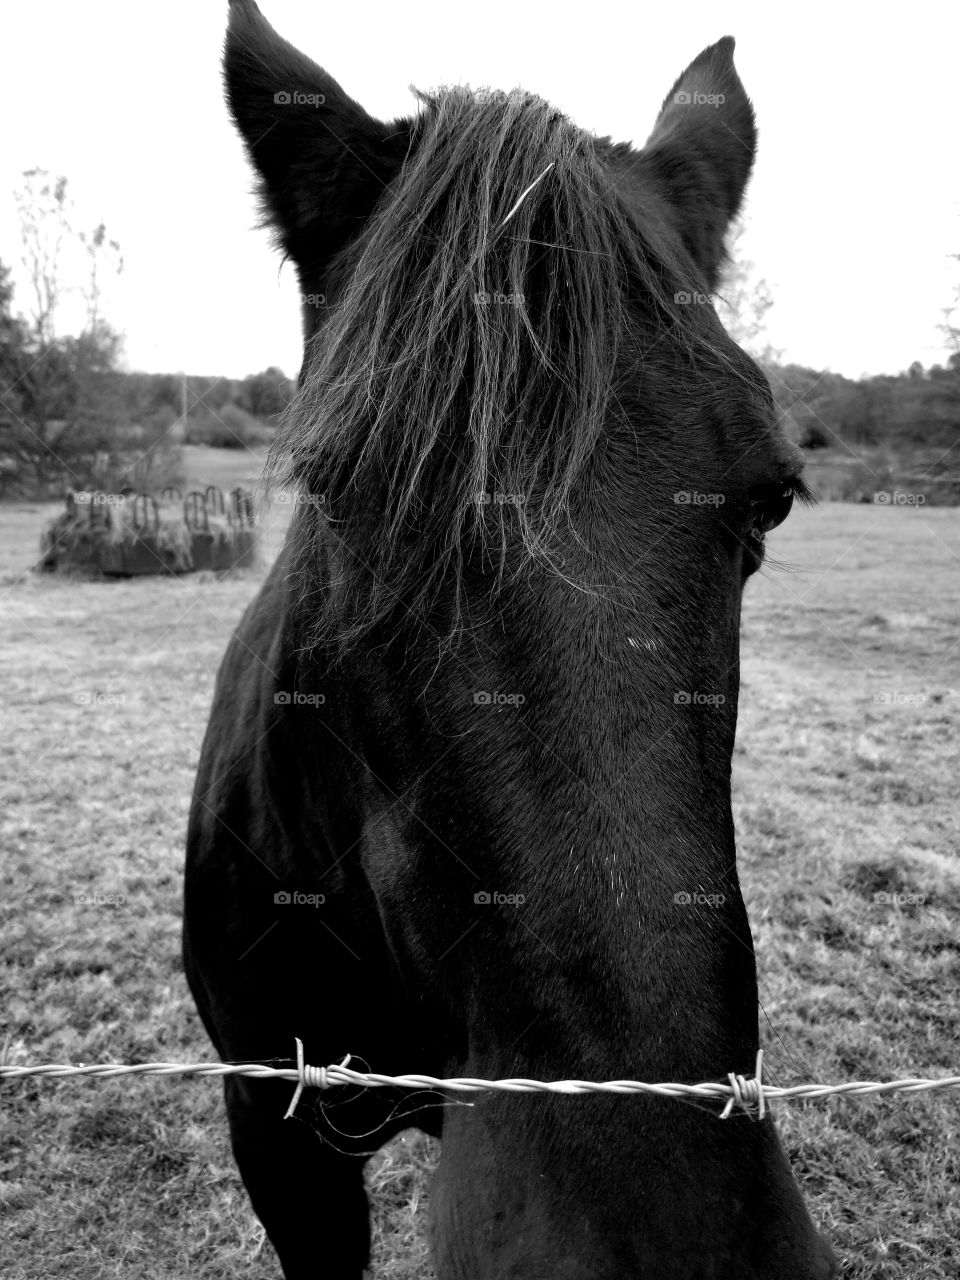 Up close and personal with the horse in black and white